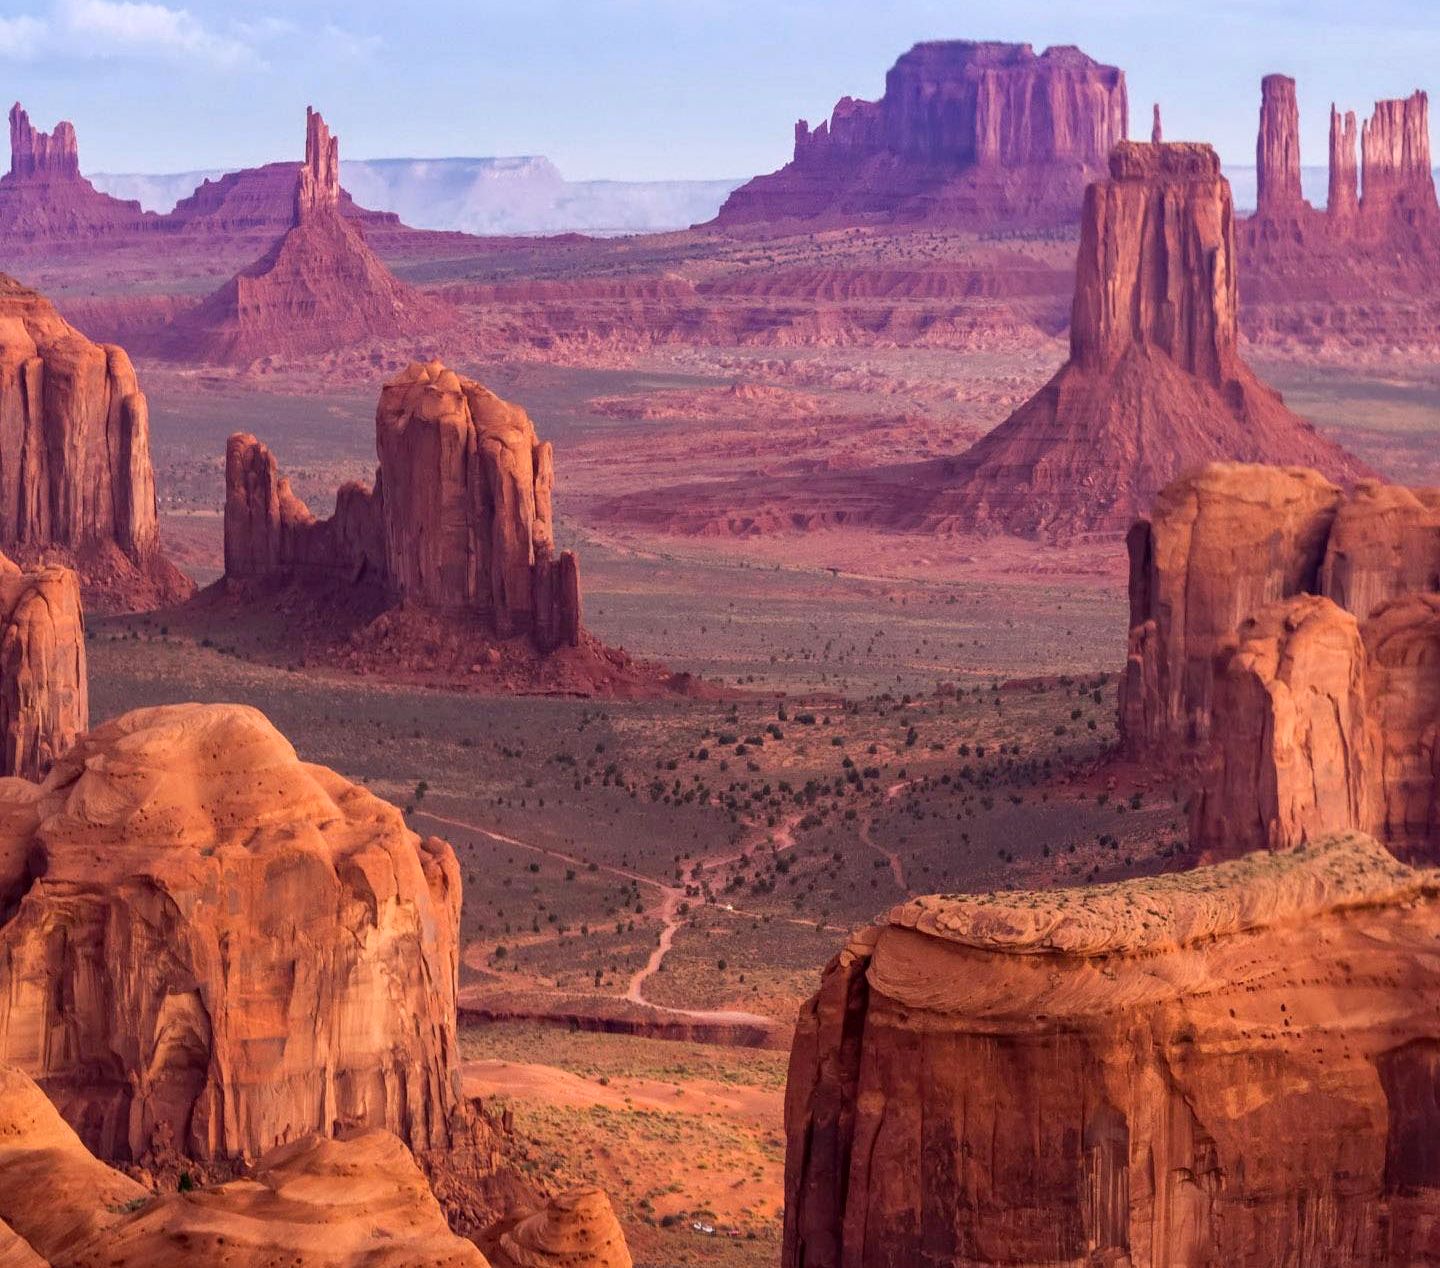 Sandstone buttes in Monument Valley